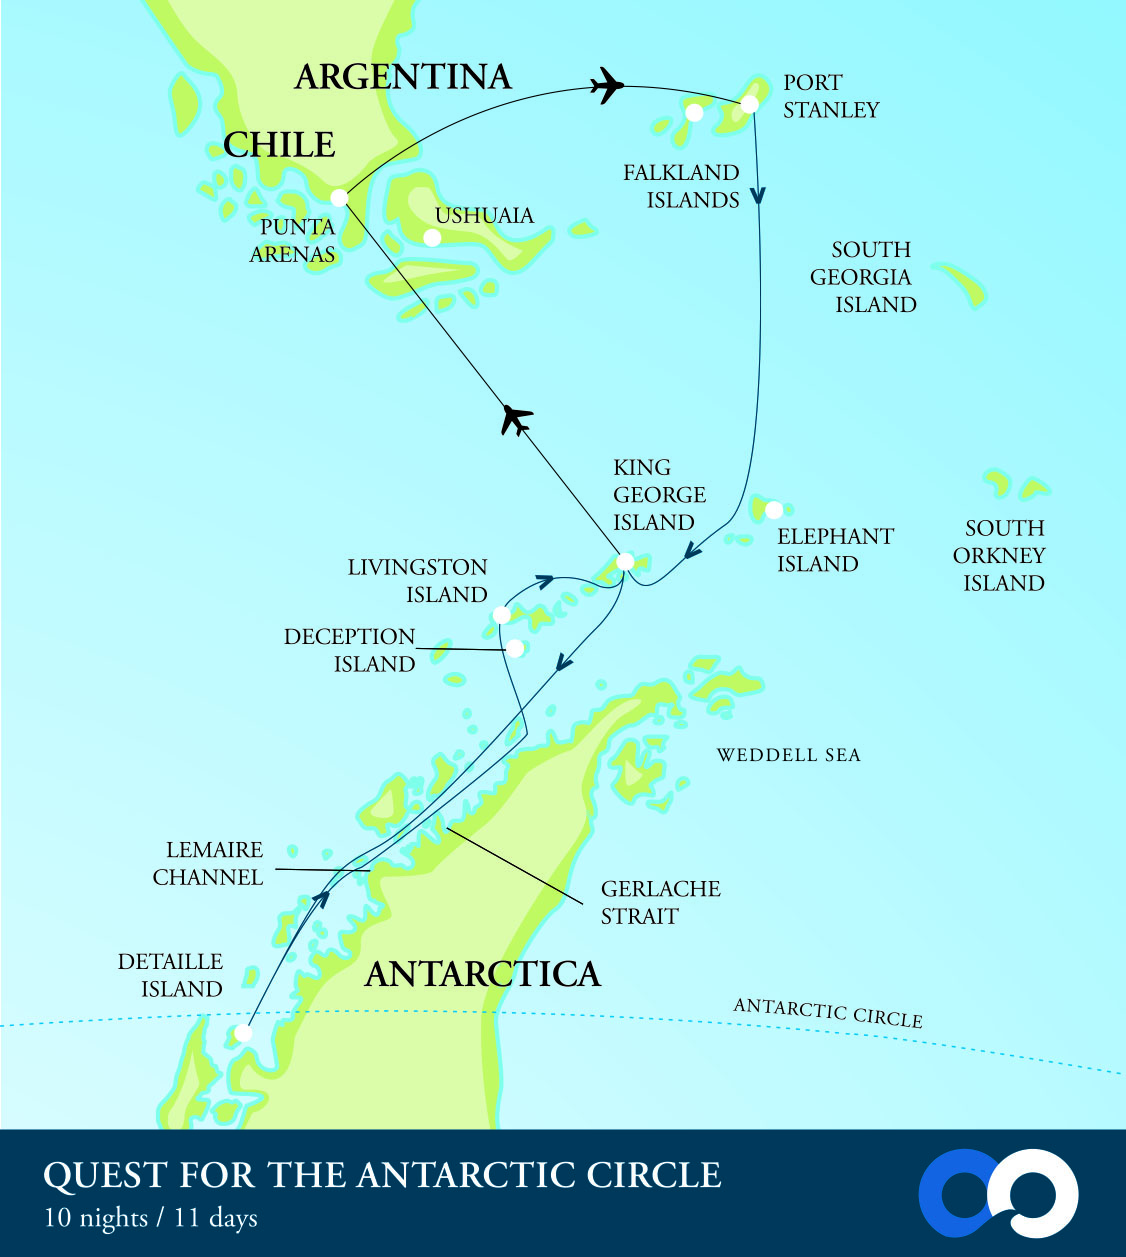 QUEST FOR THE ANTARCTIC CIRCLE